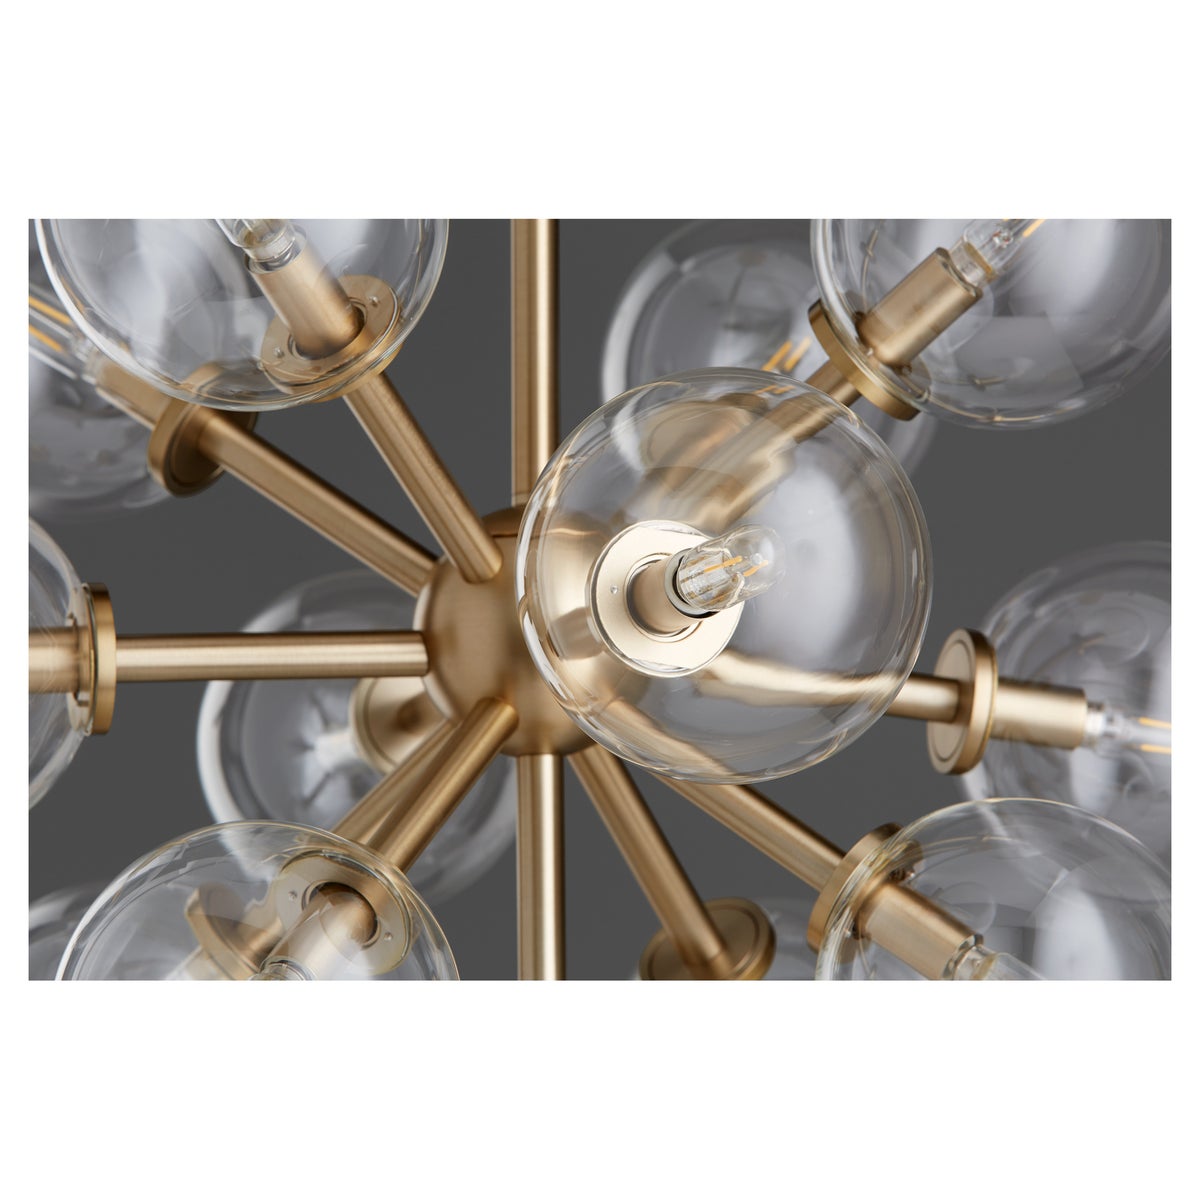 Sputnik chandelier with clear glass domes and aged brass frames, creating a mid-century modern appeal. 13 bulbs, 60W, dimmable. UL Listed.